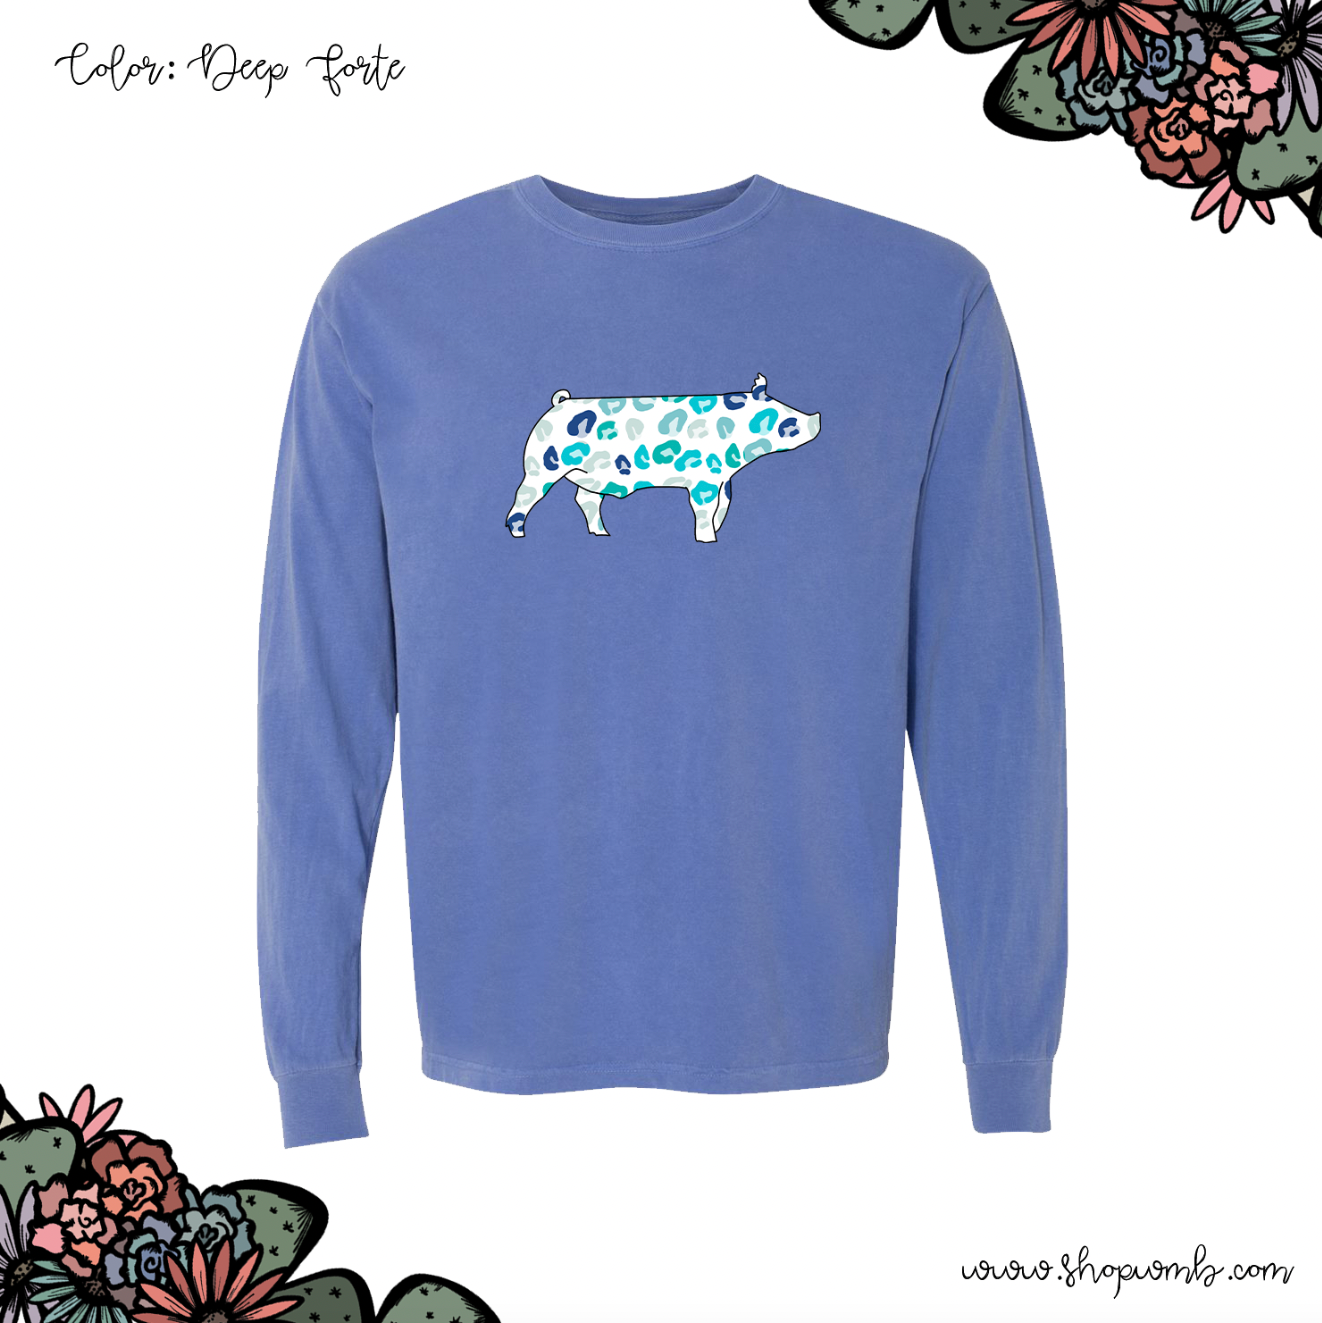 Turquoise Cheetah Pig LONG SLEEVE T-Shirt (S-3XL) - Multiple Colors!